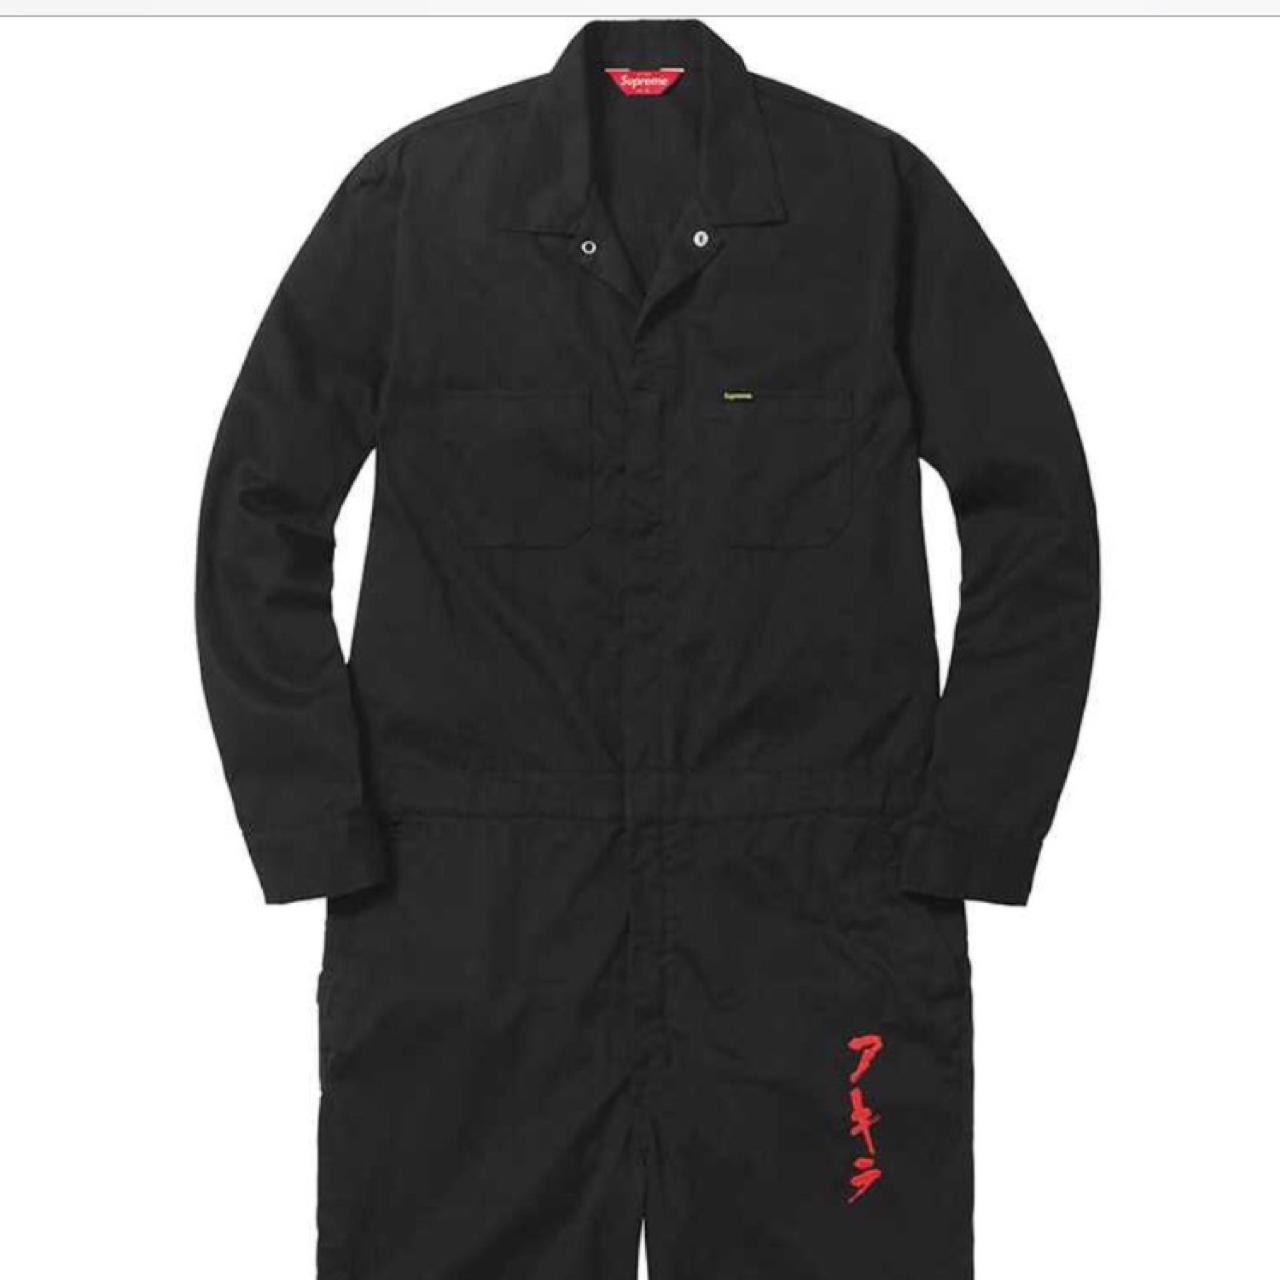 Akira x Supreme coveralls, size S. Sold out,